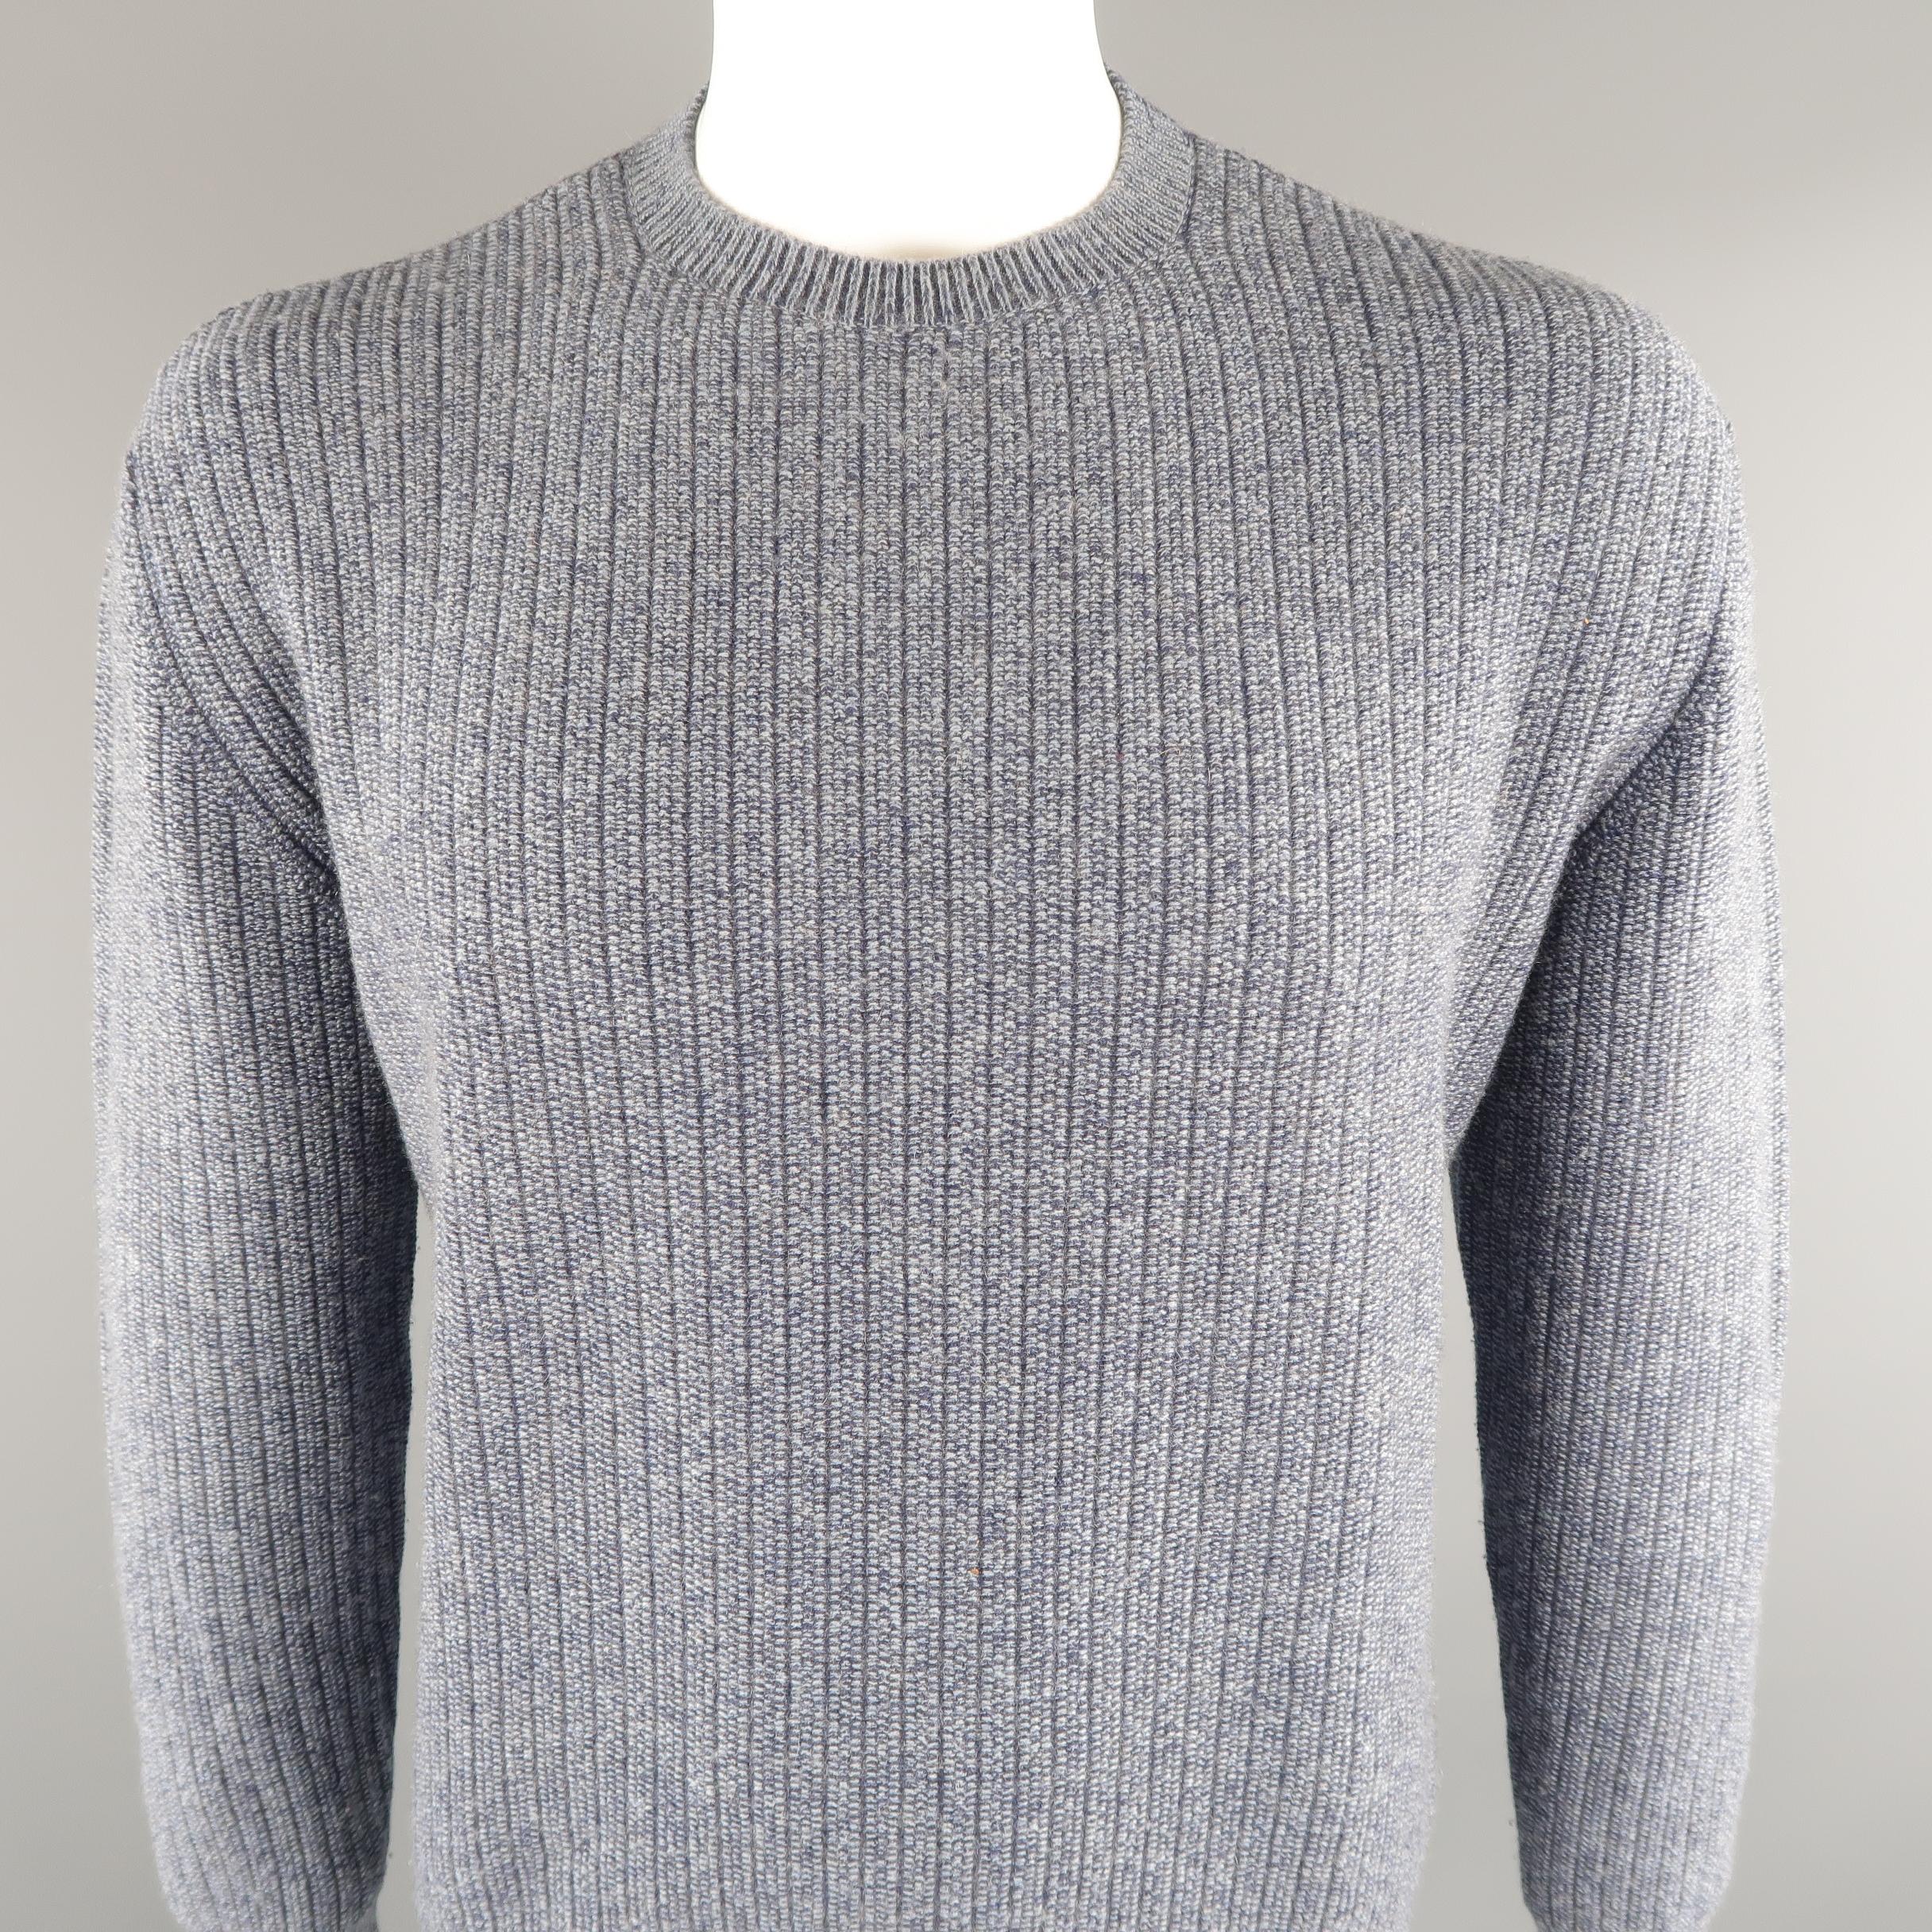 LORO PIANA sweater come in 100% cashmere in a blue tone, ribbed knit, with a crewneck and ribbed cuff and waistband. Made in Italy.
 
Excellent Pre-Owned Condition.
Marked: 52 IT
 
Measurements:
 
Shoulder: 19 in.
Chest: 46 in.
Sleeve: 25